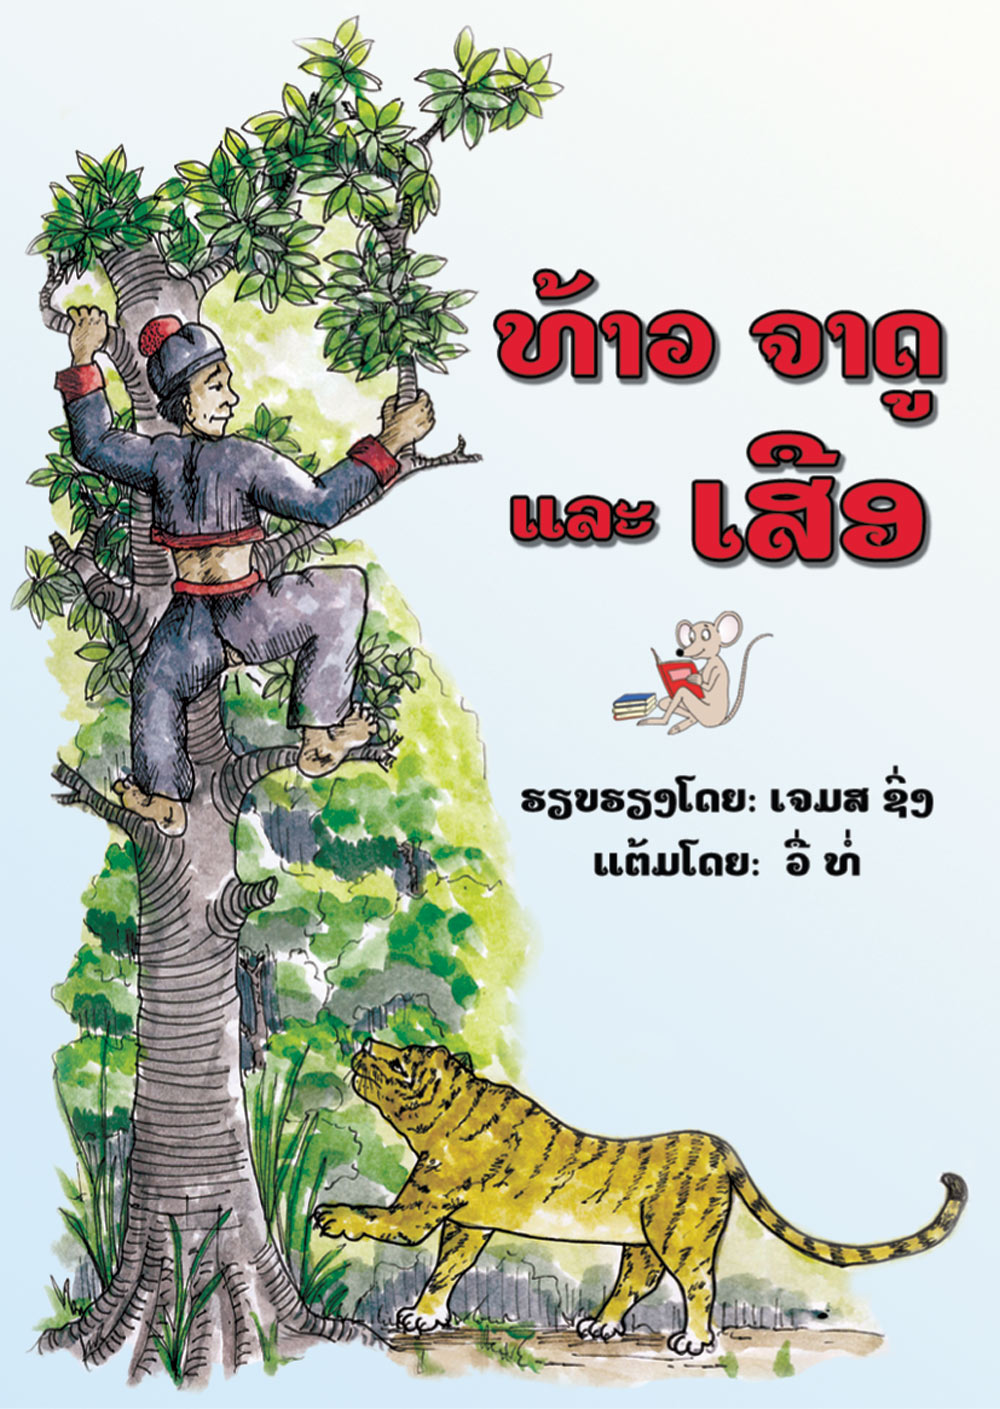 Jadu and the Tiger large book cover, published in Lao language